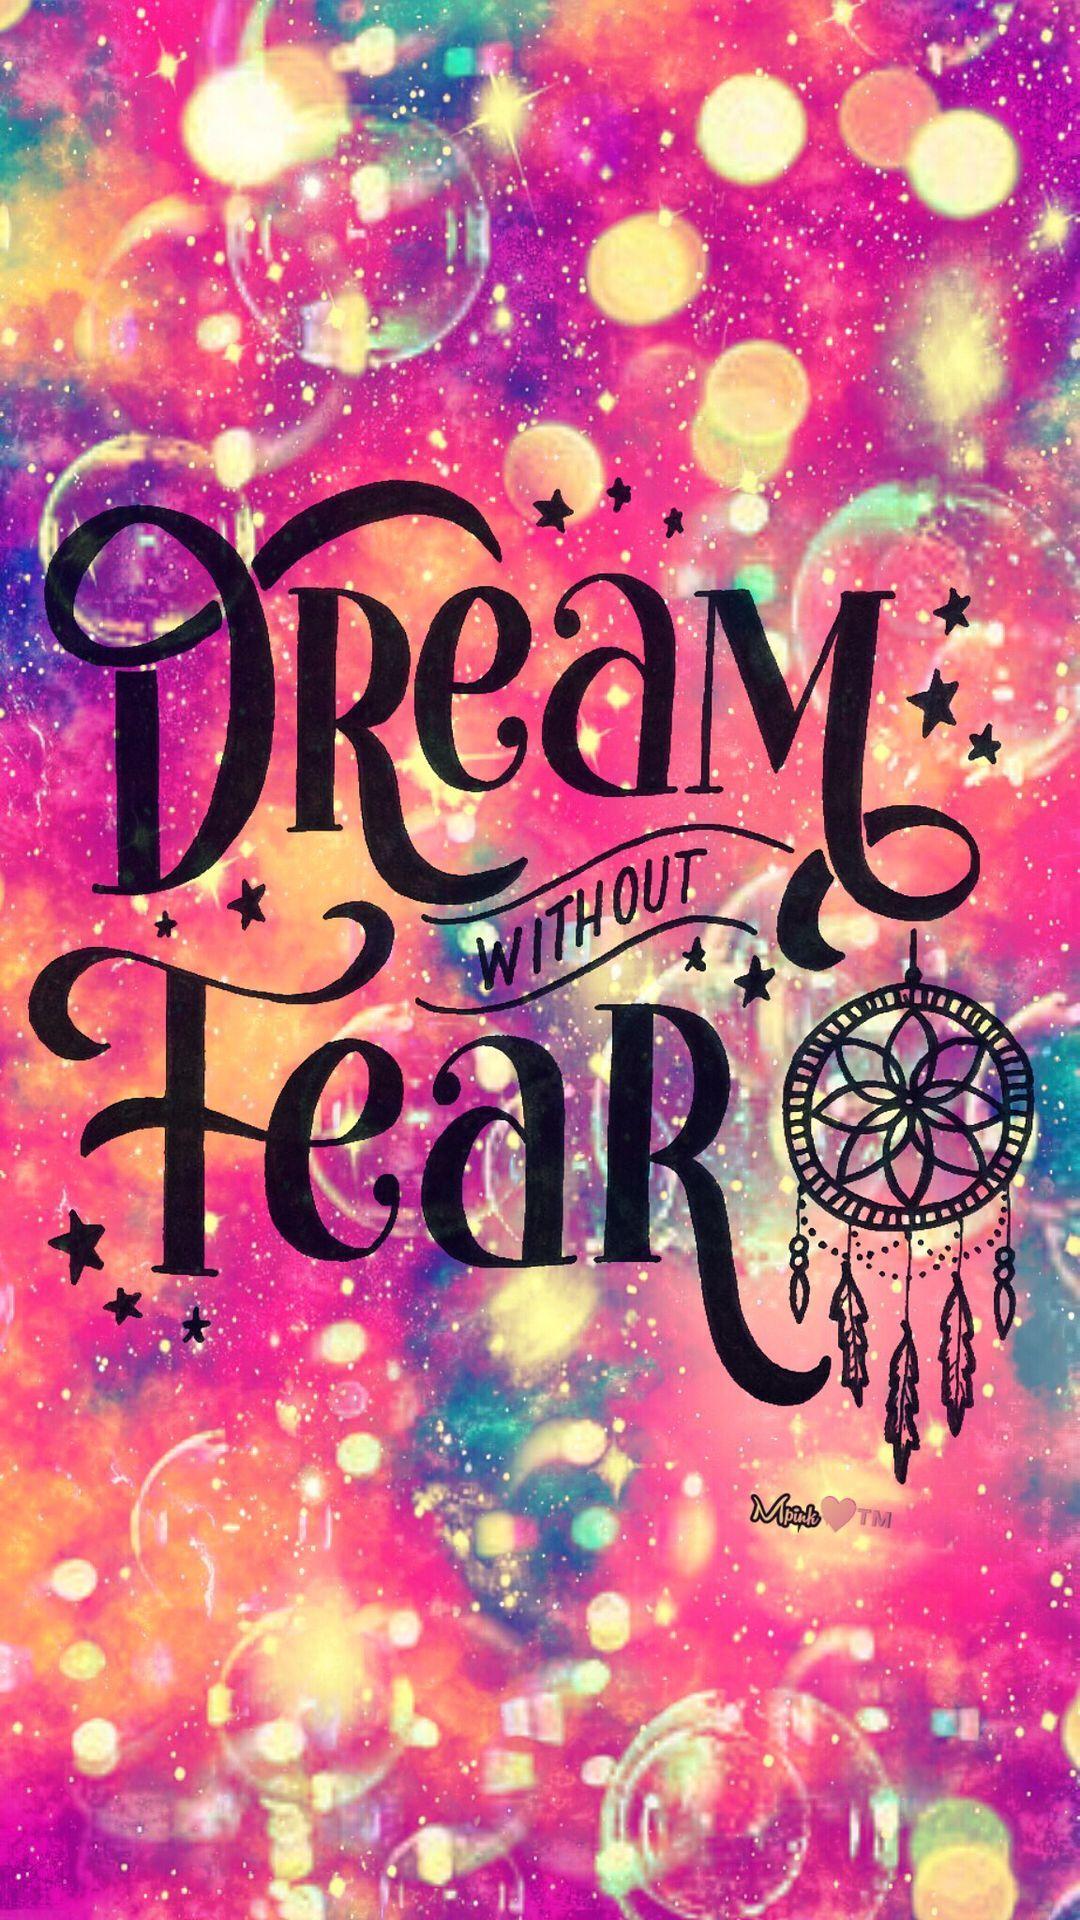 Dream Without Fear Galaxy Wallpaper #androidwallpaper